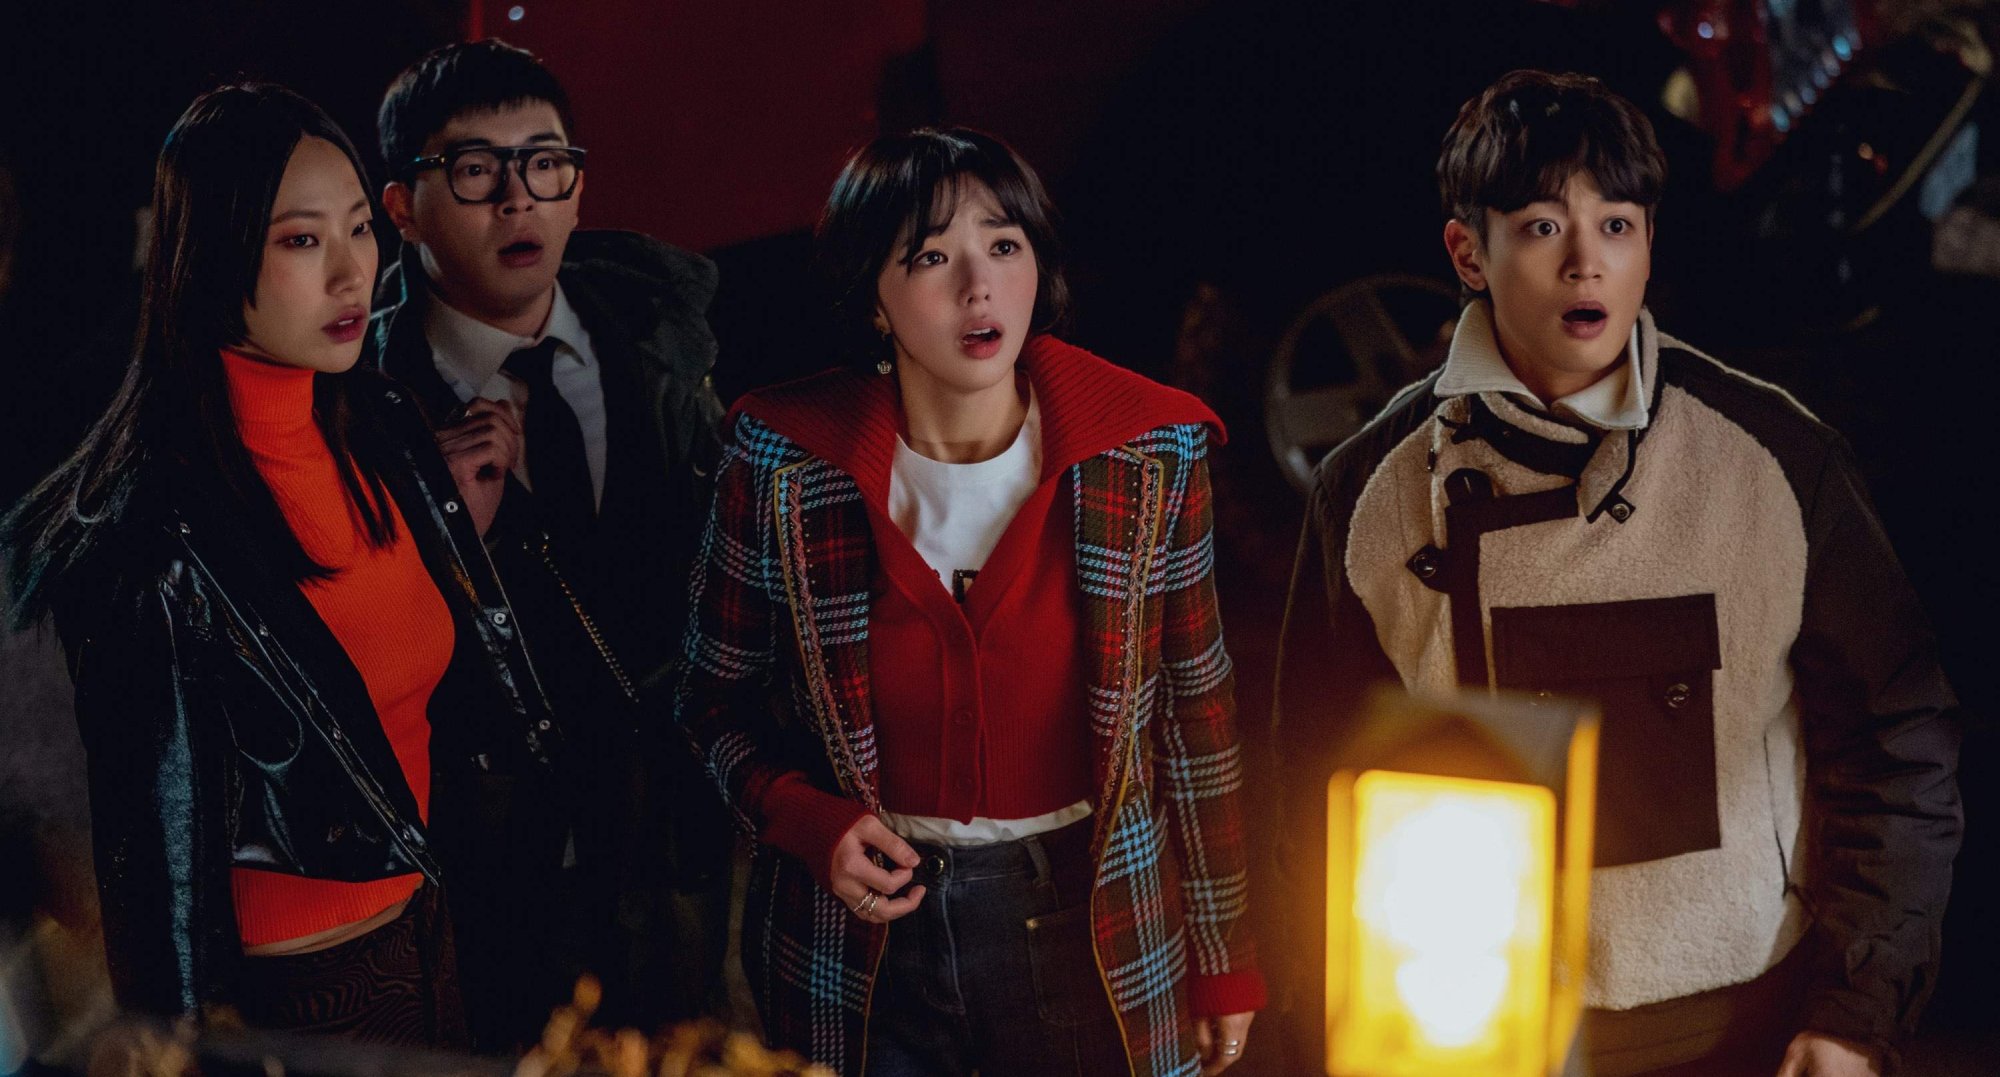 Minho and Chae Soo-bin star in 'The Fabulous' K-drama for December.